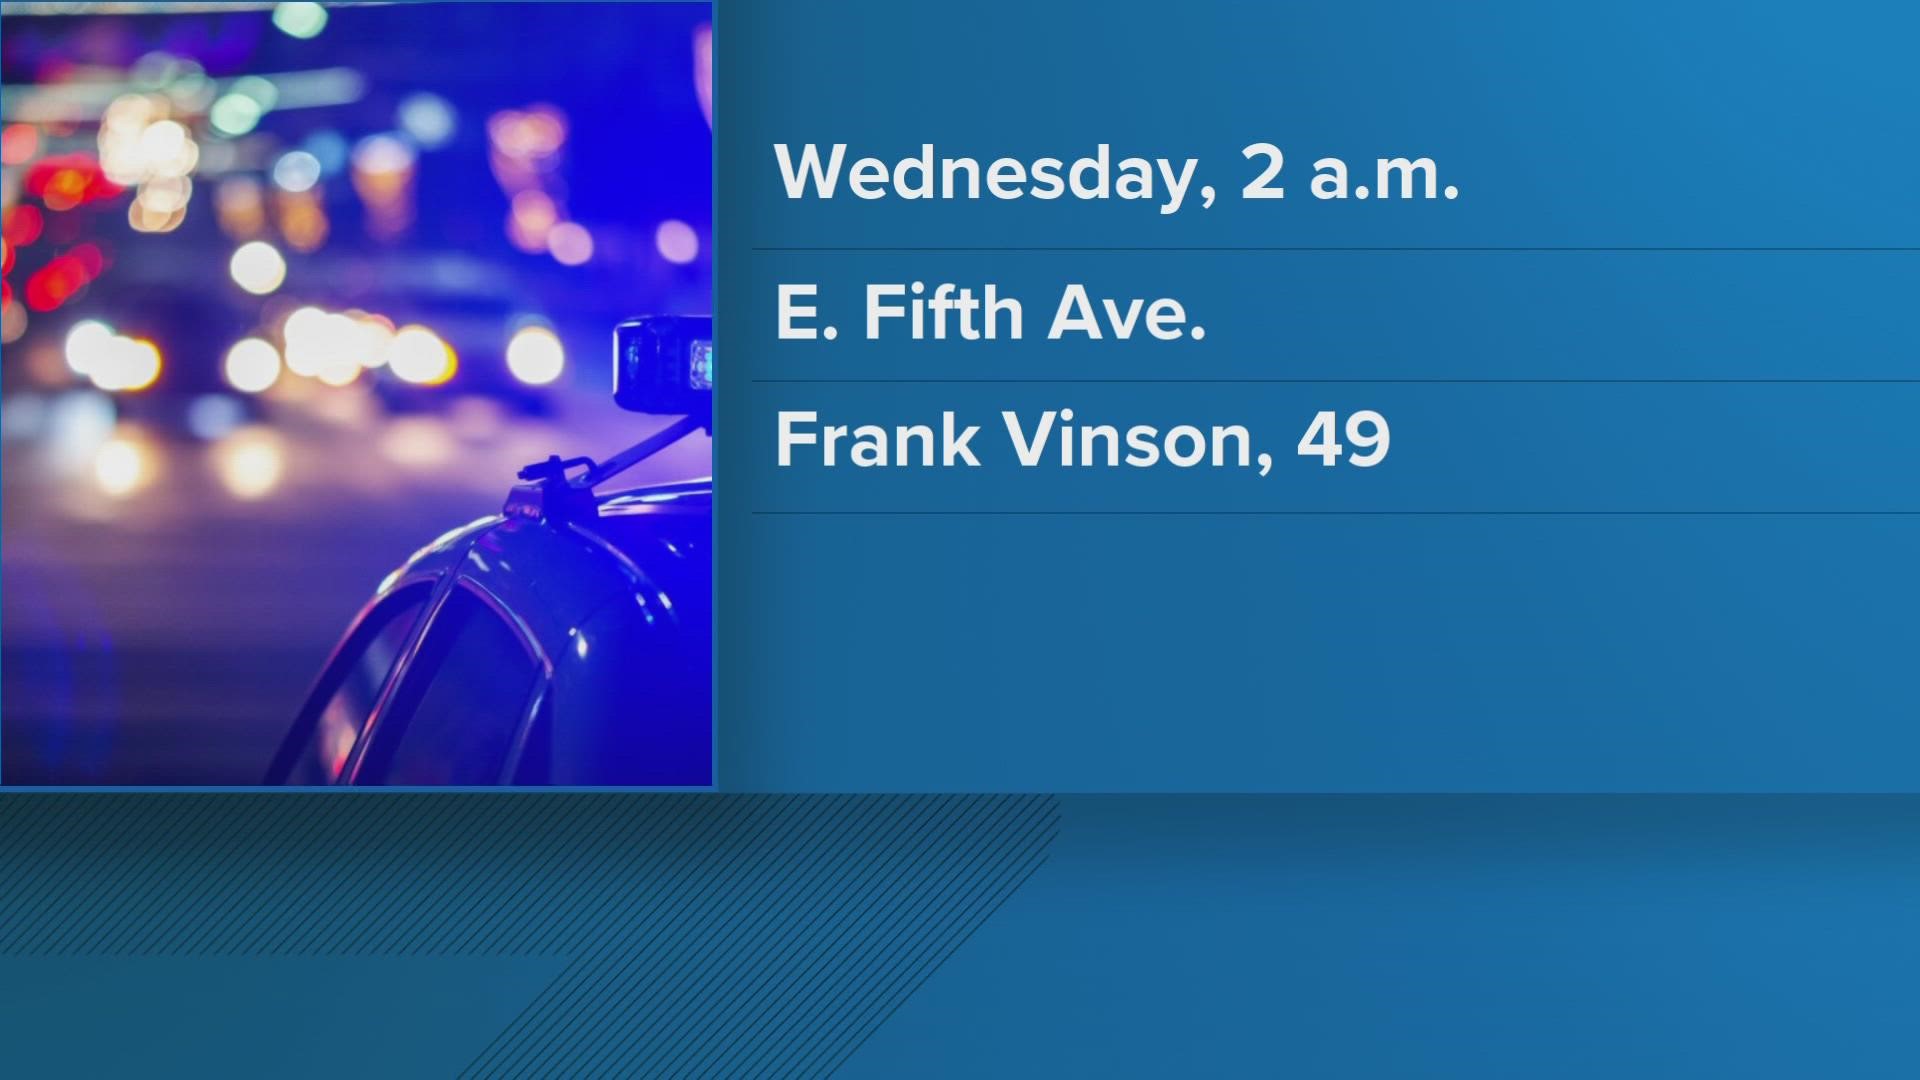 Investigators said 49-year-old Frank Vinson died at that scene on East Fifth Avenue.